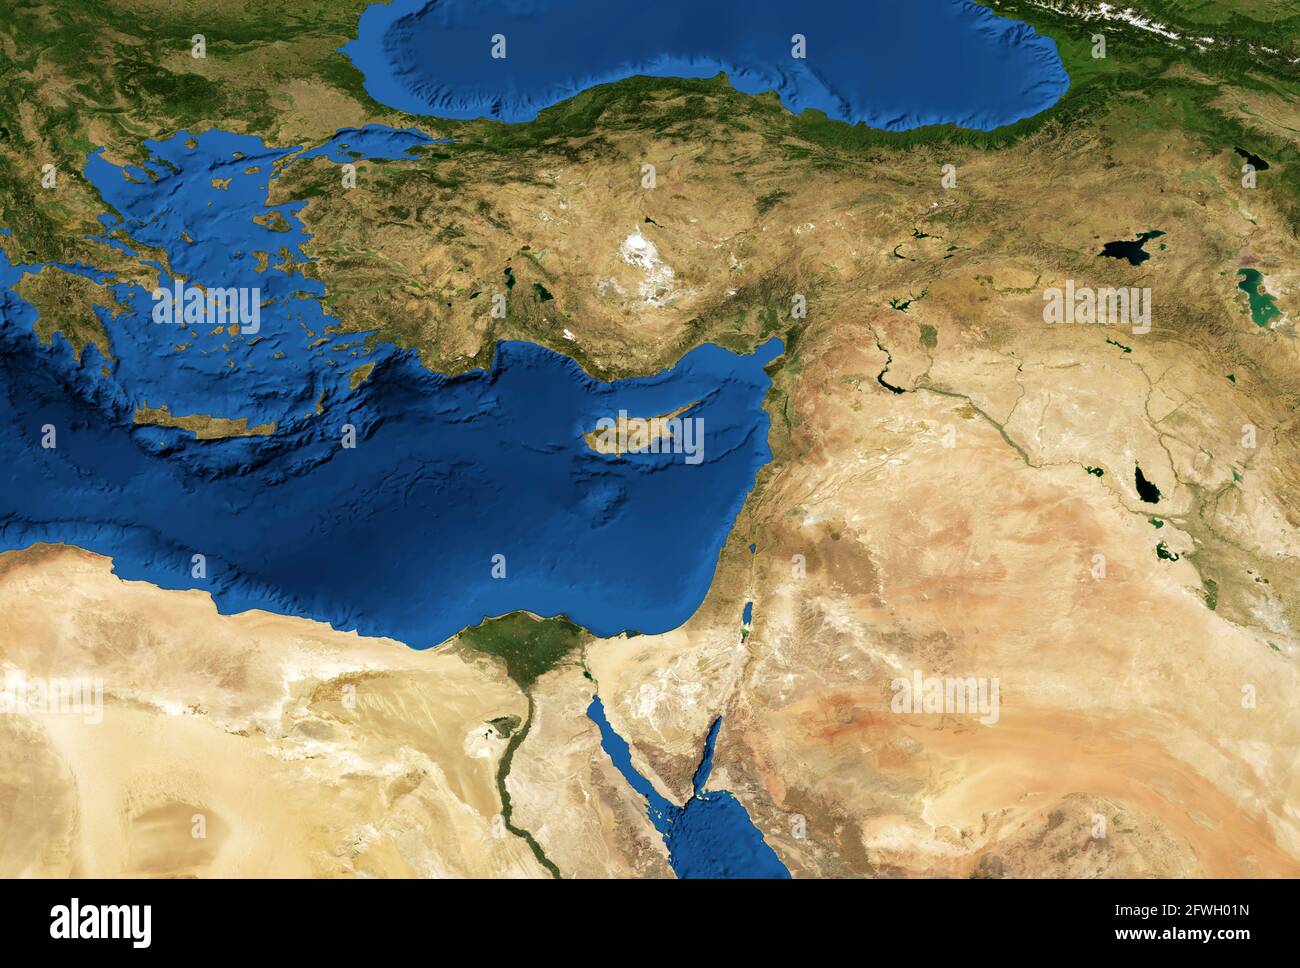 Middle East map in global satellite photo, flat view of part of world from space. Detailed physical map of Turkey, Syria, Israel, Lebanon, Egypt, Jord Stock Photo